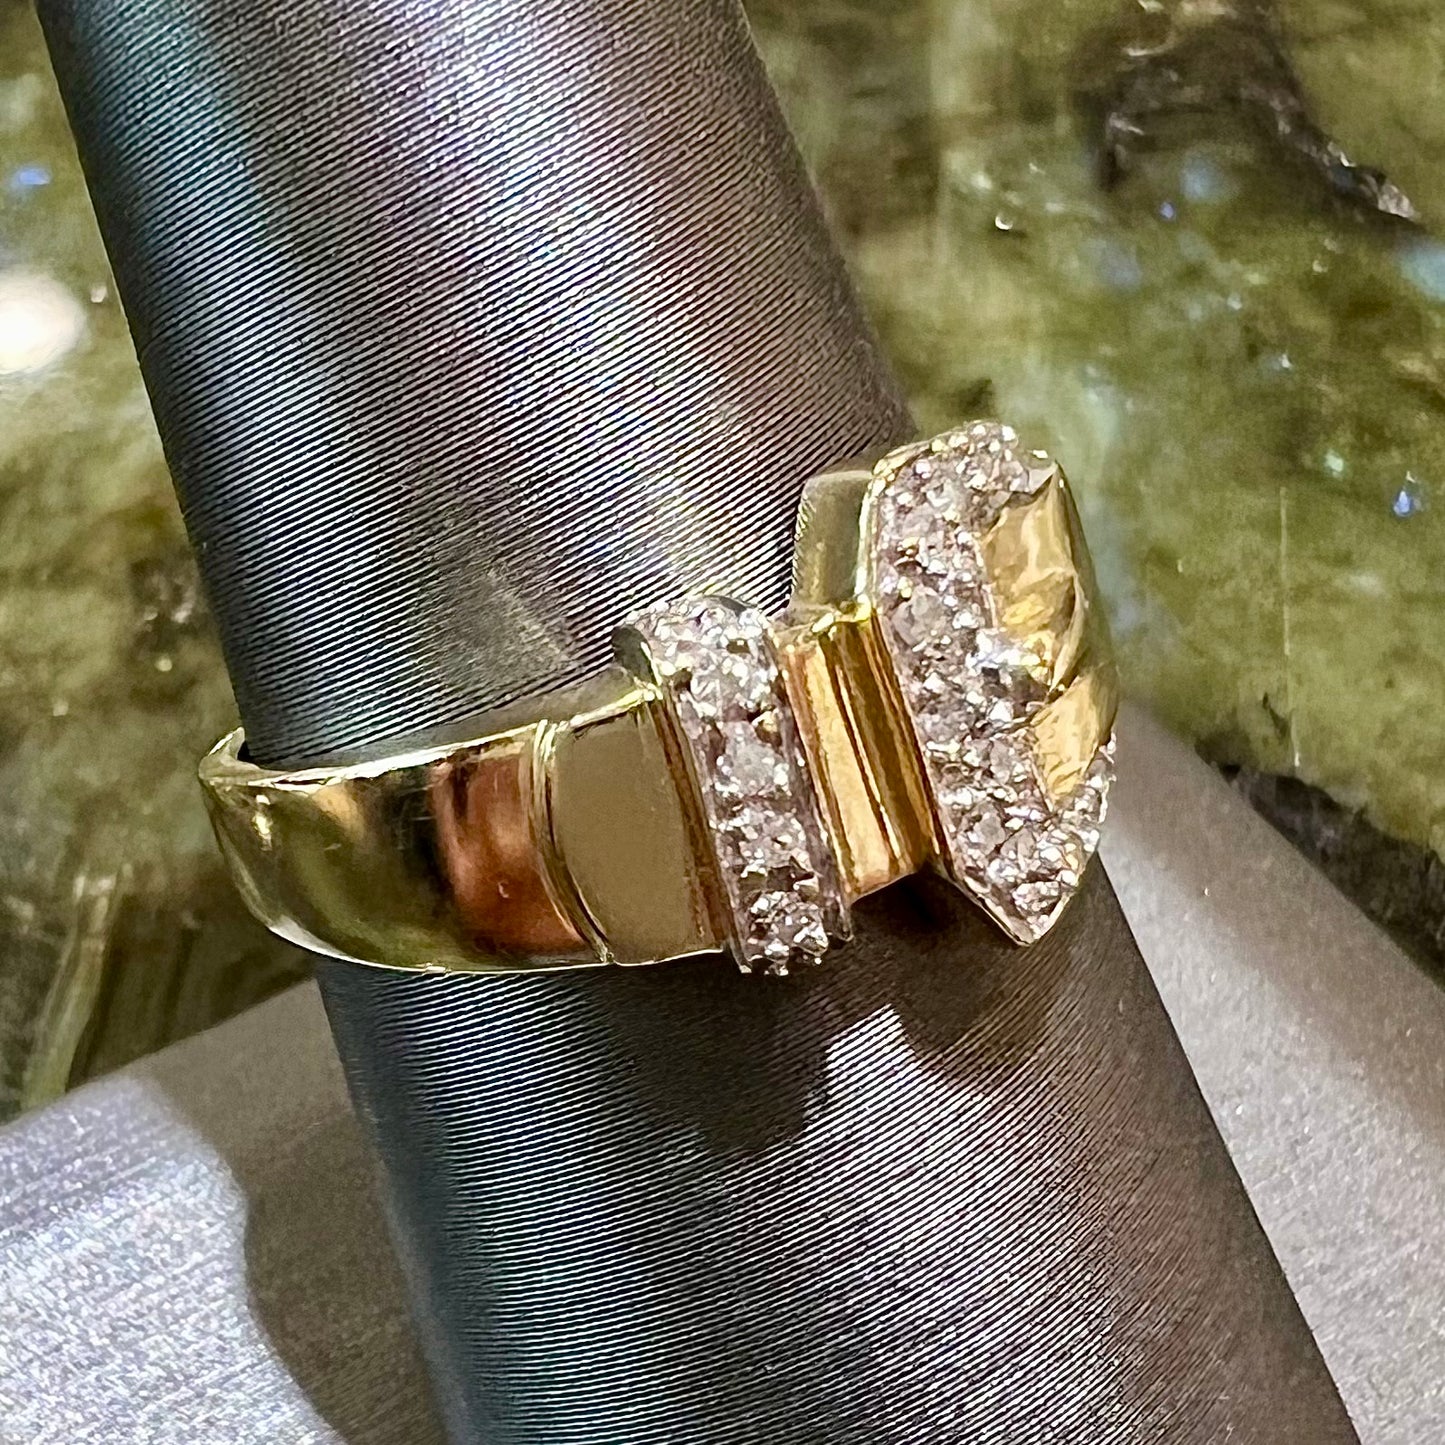 A yellow gold buckle ring set with round diamonds in the buckle.